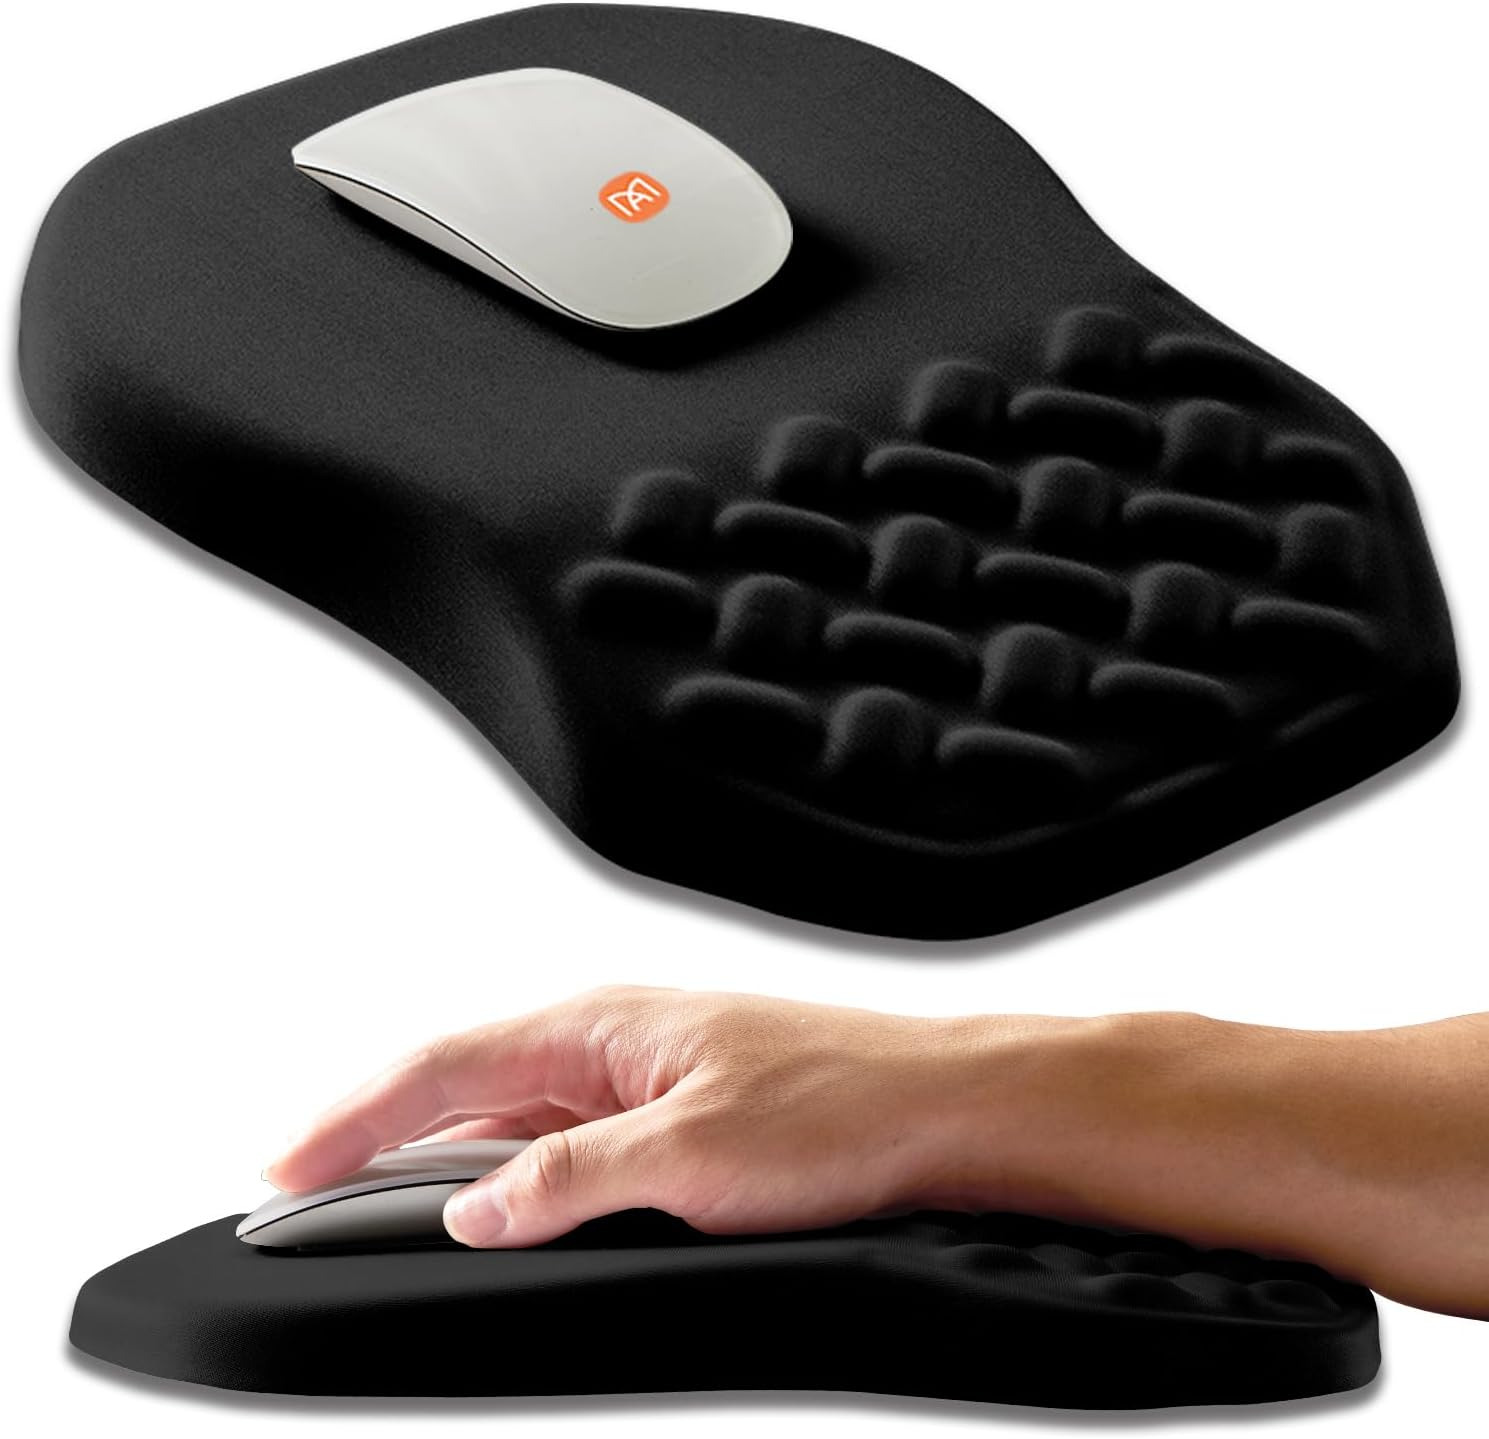 Ergonomic Slope Mouse Pad Wrist Support, Wrist Rest Mousepad for Carpal Tunnel P